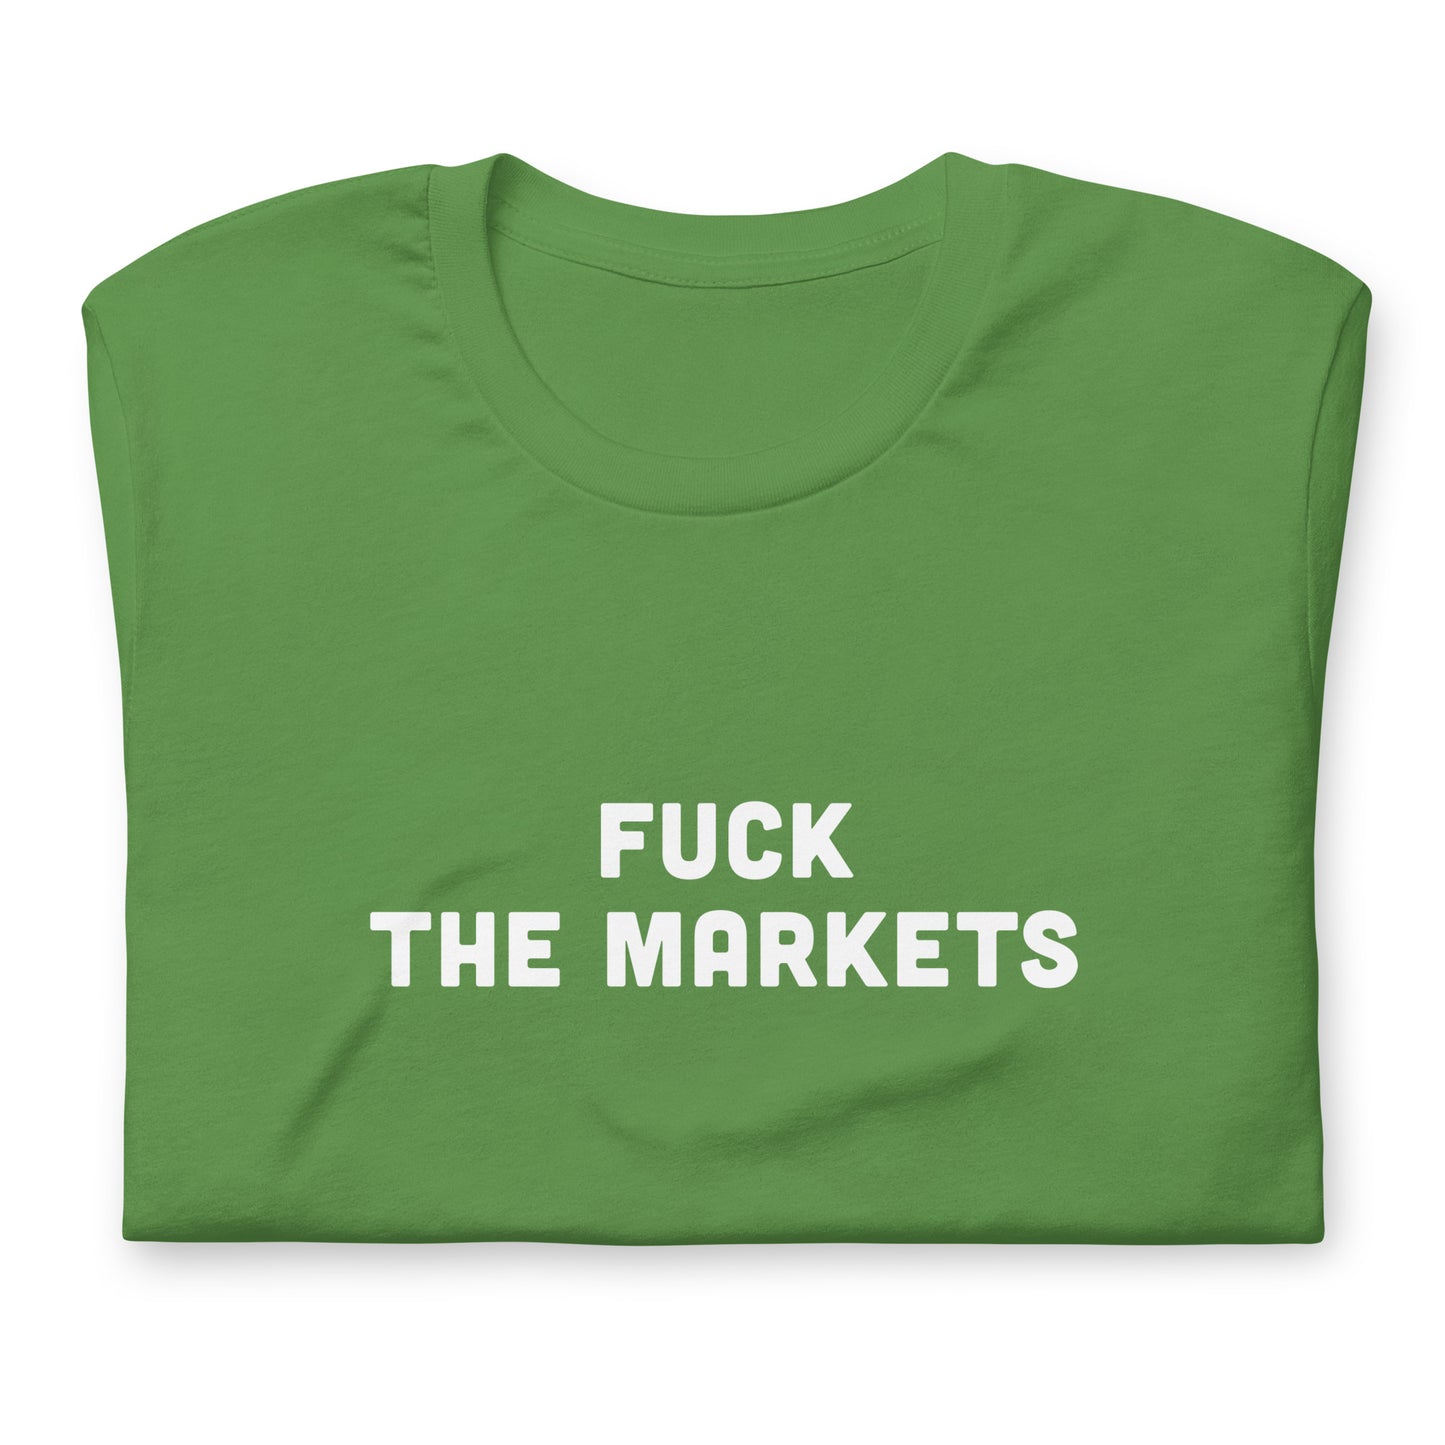 Fuck The Markets T-Shirt Size 2XL Color Navy